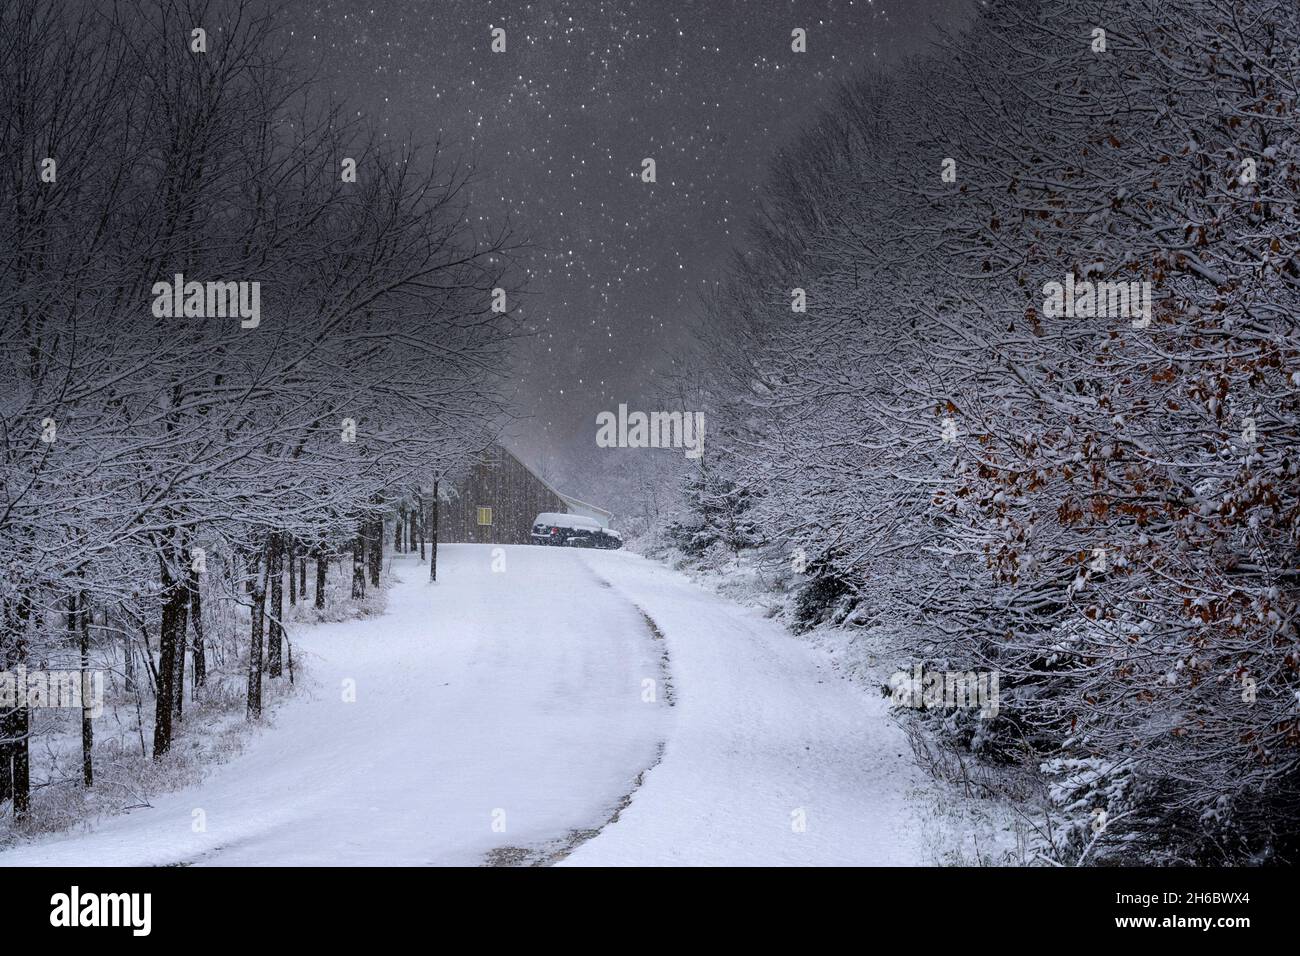 Coming home for the holidays, falling snow on a country lane illuminated by automobile headlights. Stock Photo